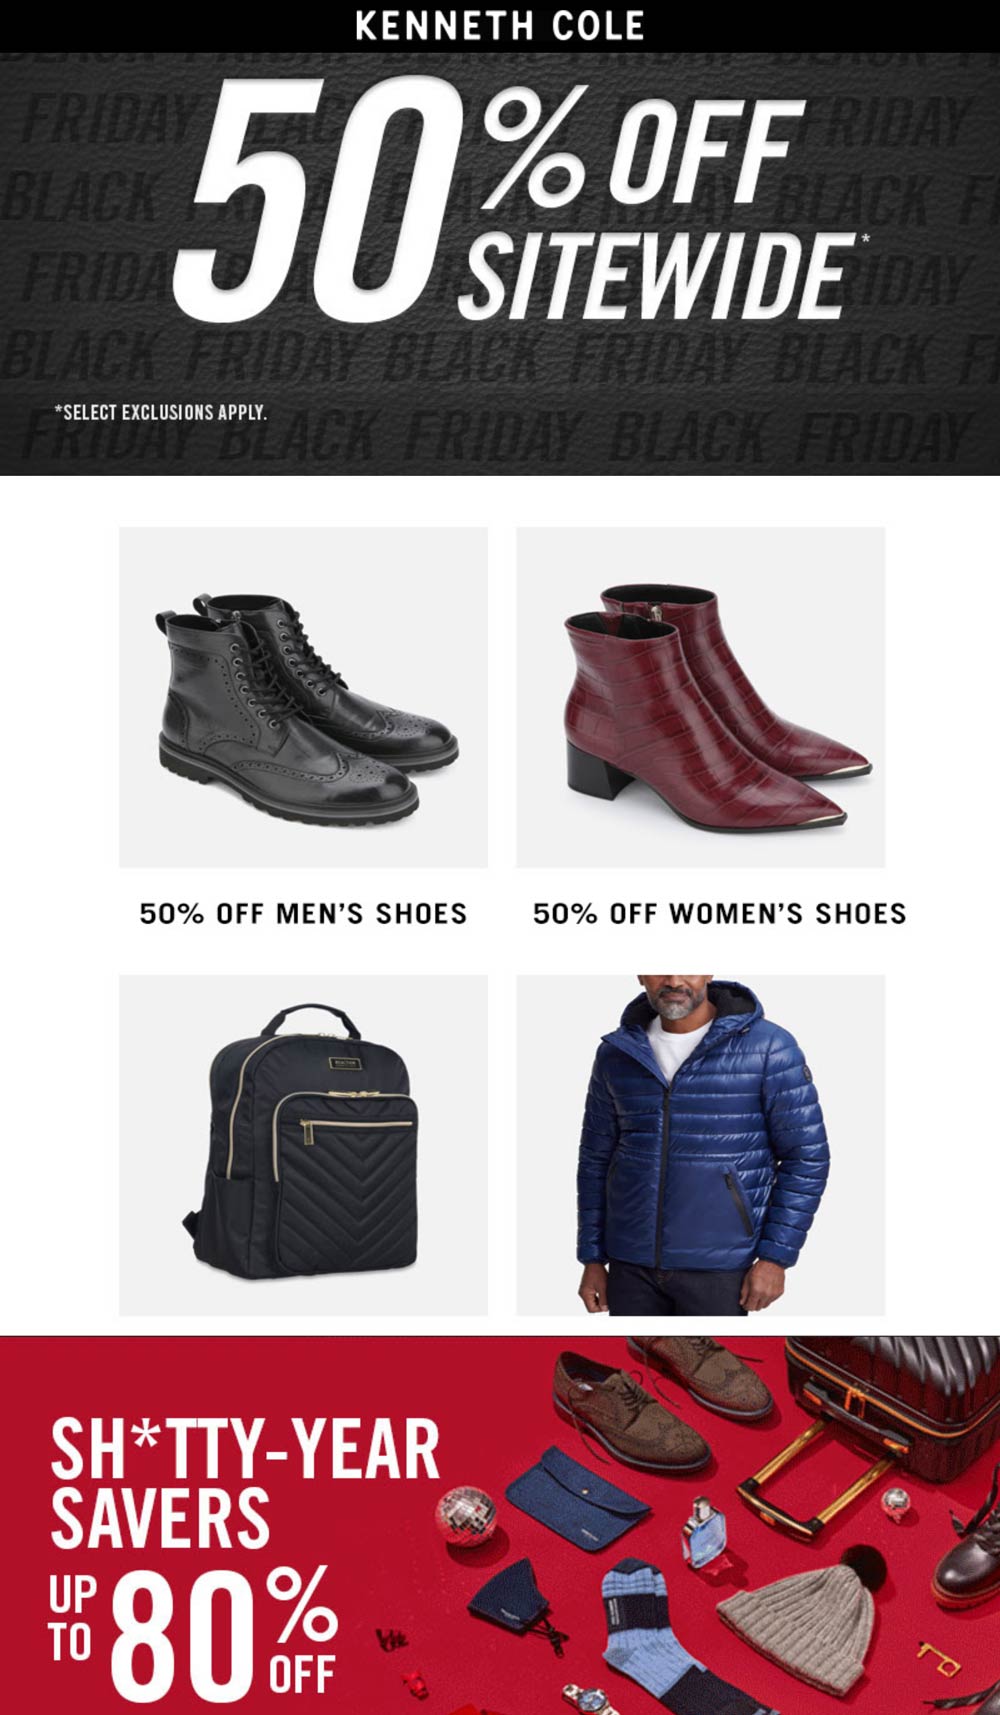 Kenneth Cole stores Coupon  50% off everything today at Kenneth Cole #kennethcole 